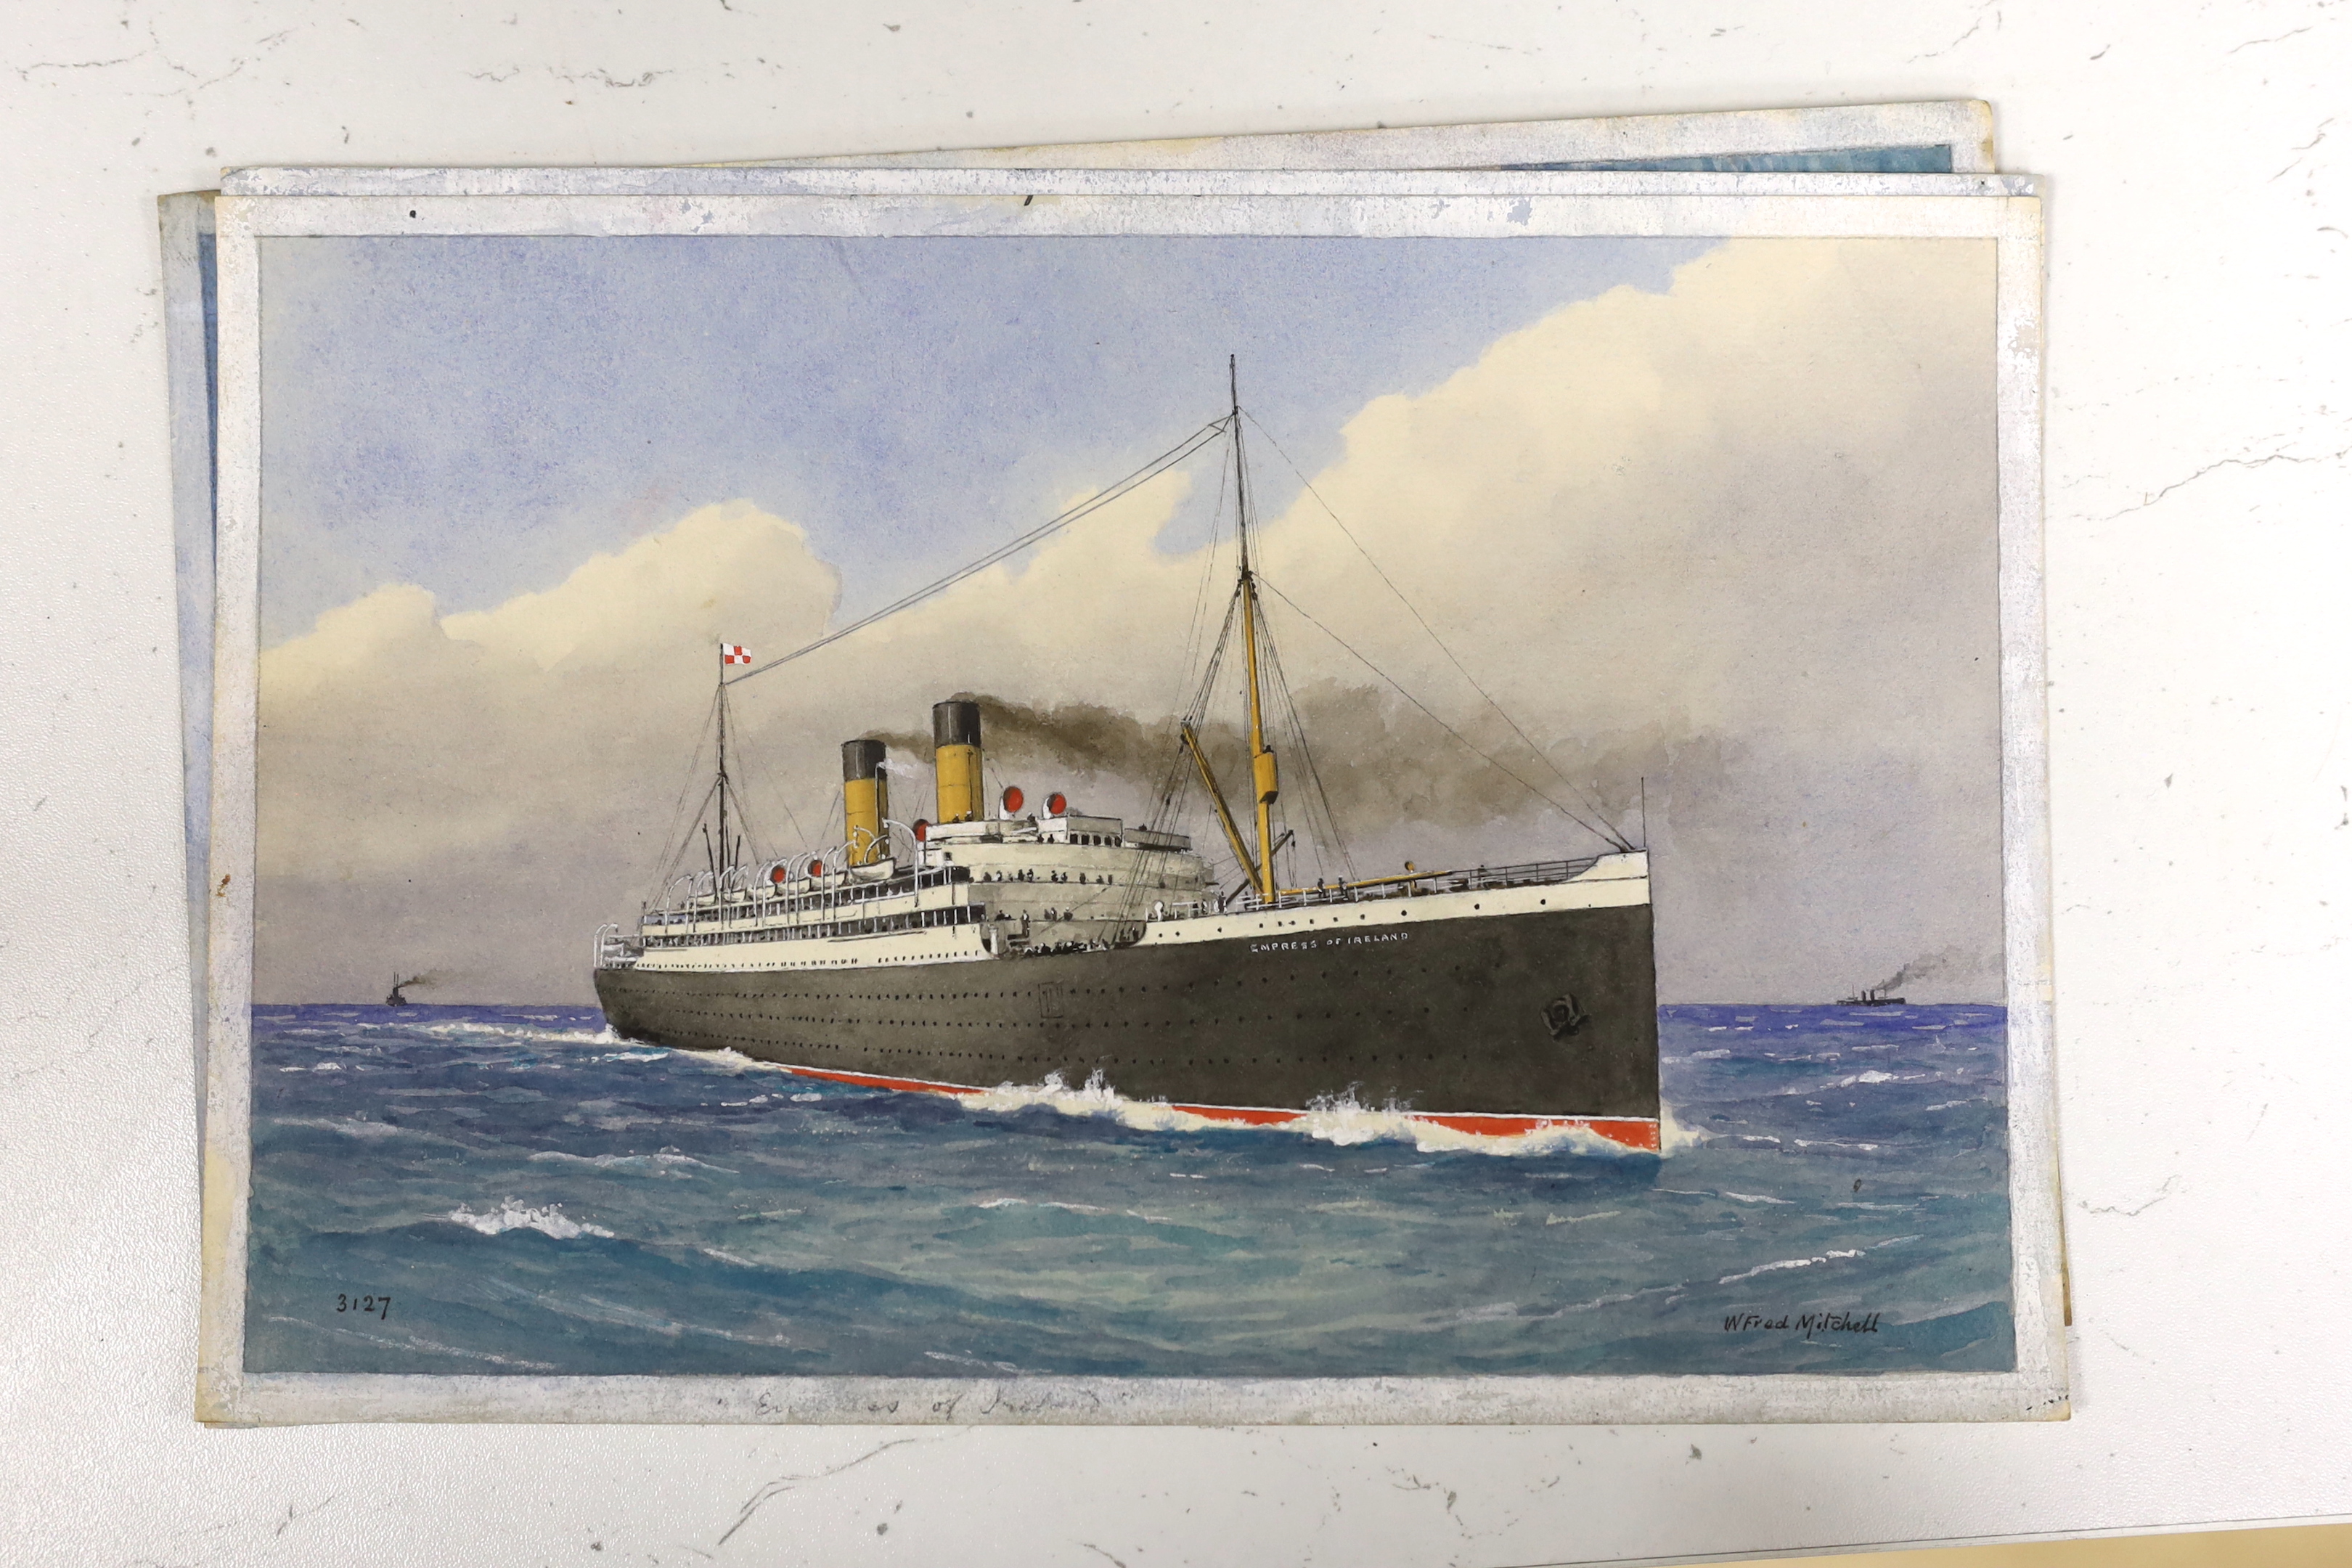 William Frederick Mitchell (1845-1914), set of four maritime watercolours, ‘Shamrock IV’, ‘Storstad’, ‘St Louis’ and ‘Empress of Ireland’, each signed, two dated 1914, 17 x 26cm, unframed